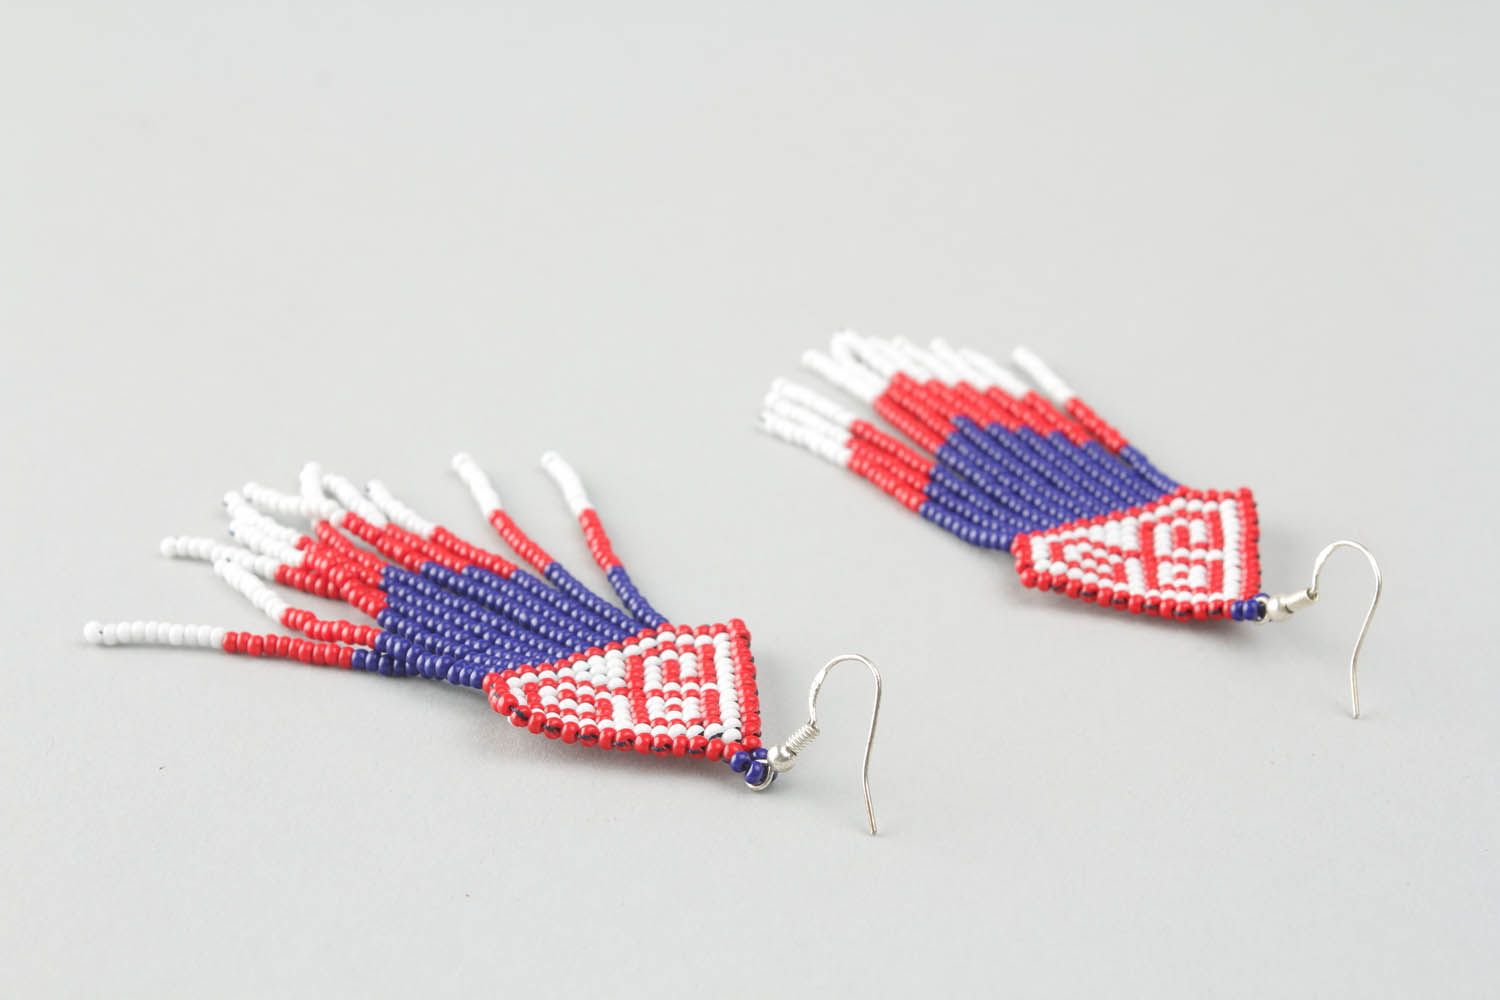 Beaded earrings with ornament photo 3